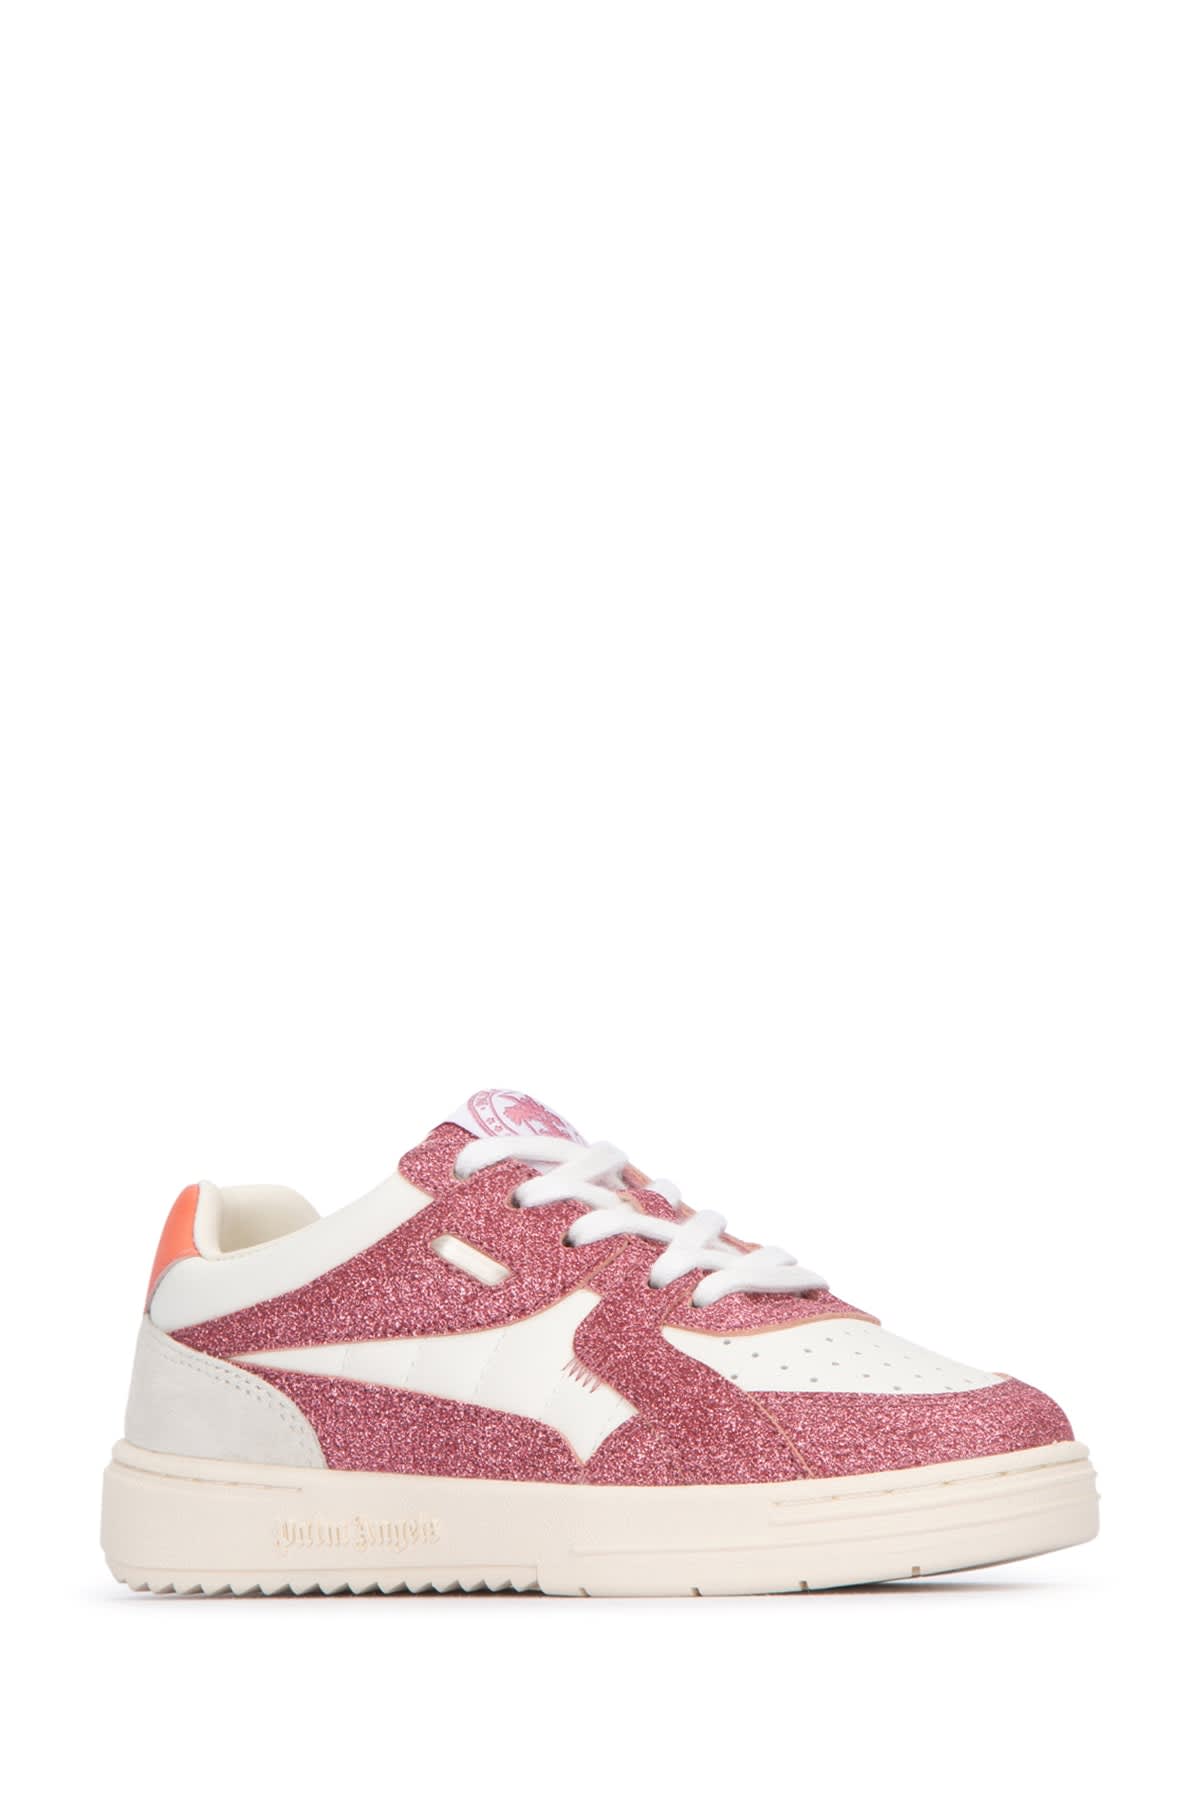 Palm Angels Kids' Sneakers In Whitepink